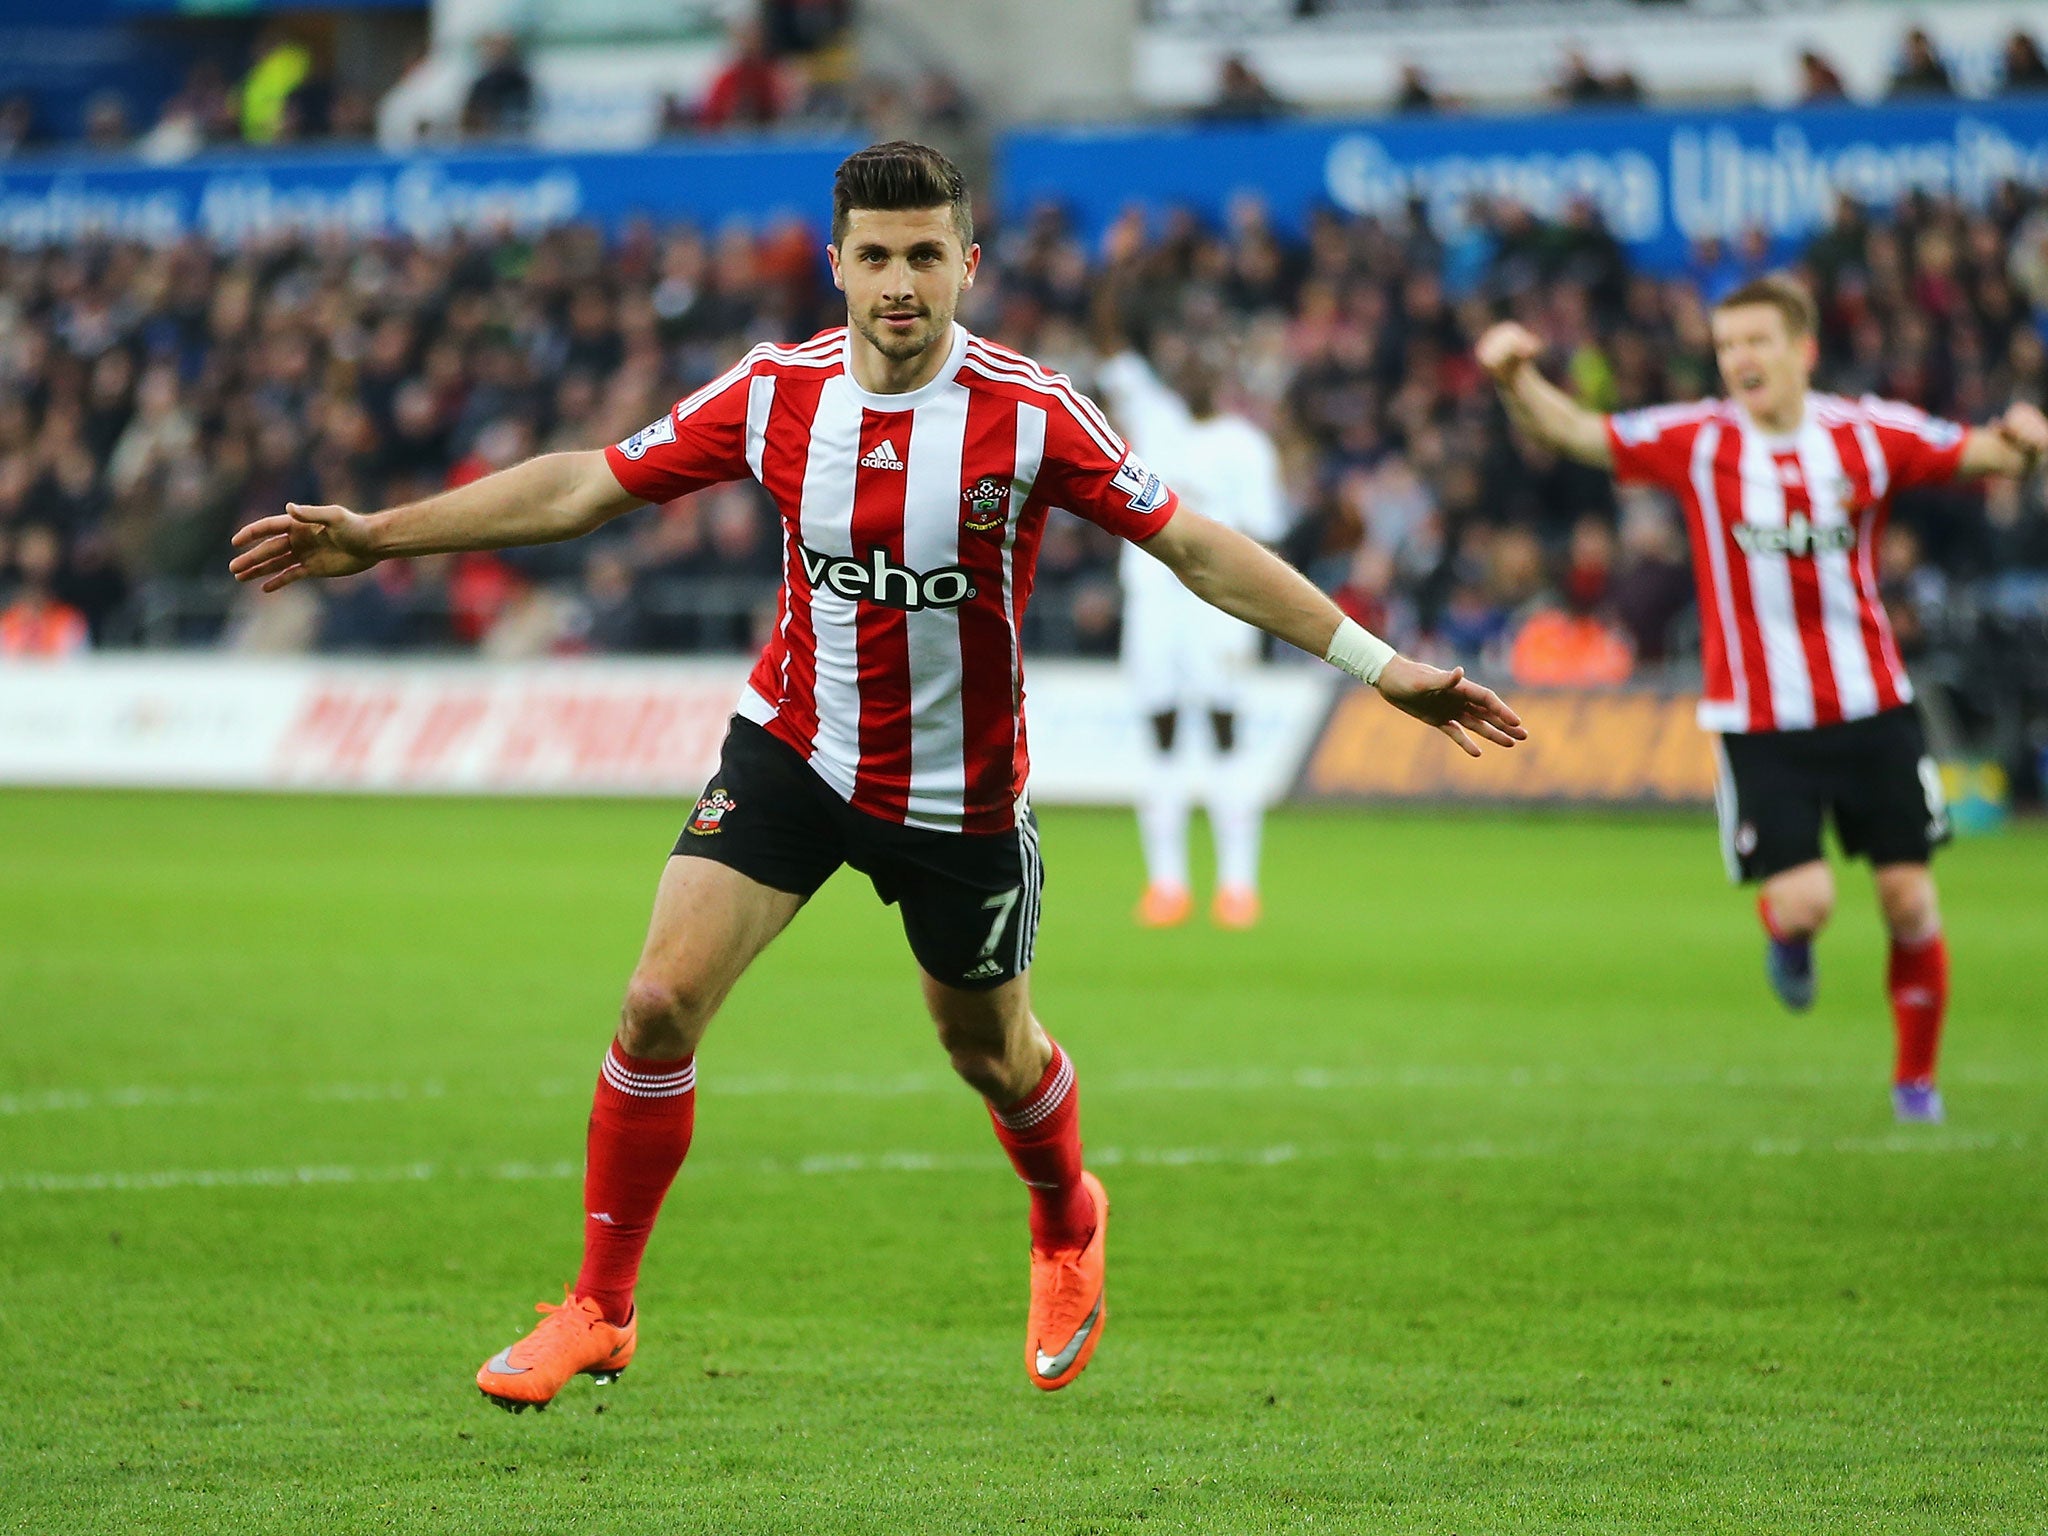 Shane Long grabbed the only goal of the game to give Saints the win